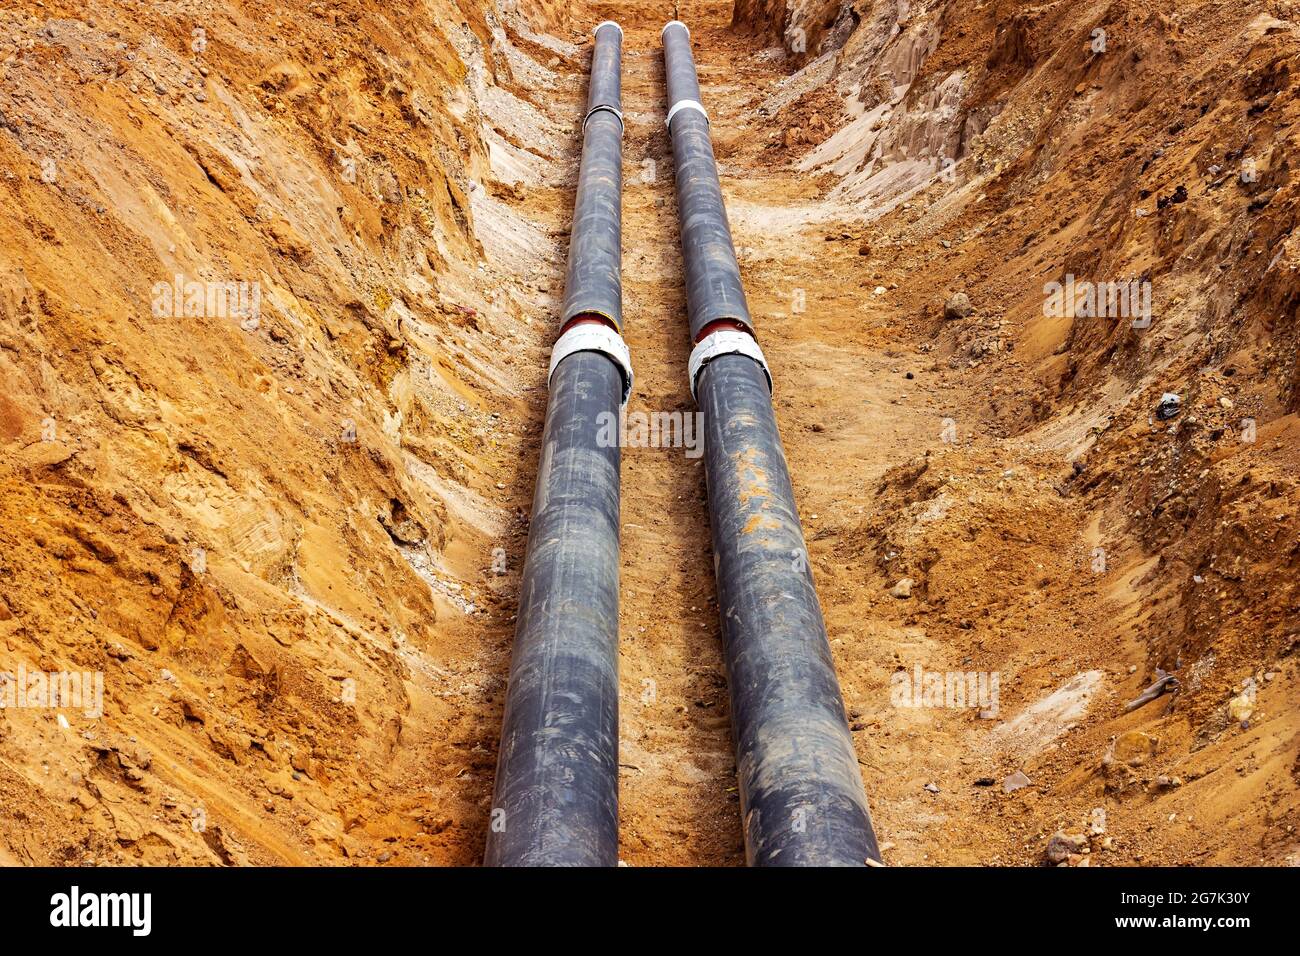 Installation of the distribution unit of heating and water supply network. Frame for connecting pipes in the trench of ground. Stock Photo